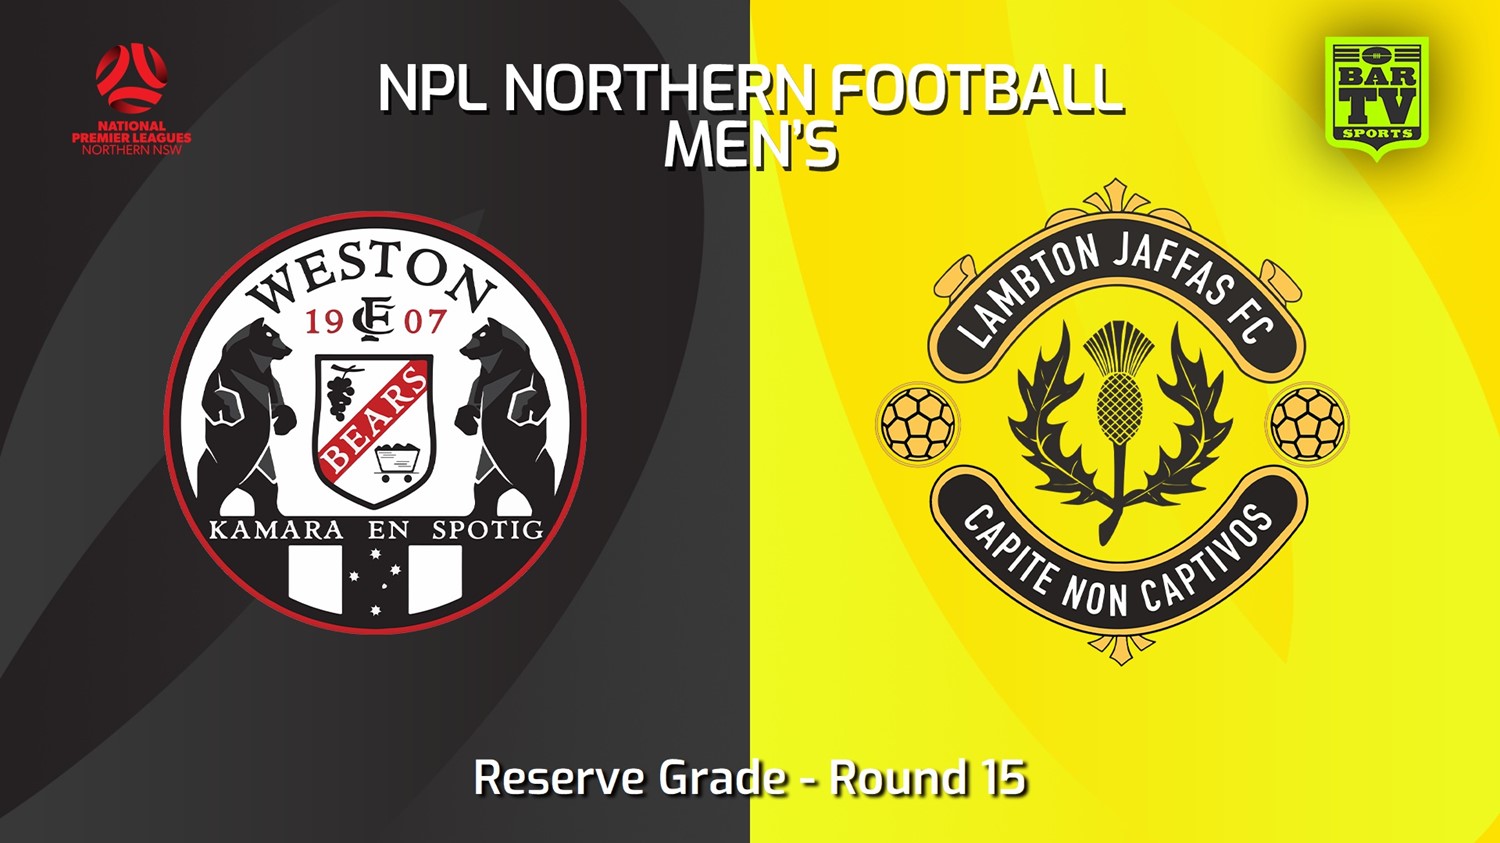 240616-video-NNSW NPLM Res Round 15 - Weston Workers FC Res v Lambton Jaffas FC Res Minigame Slate Image